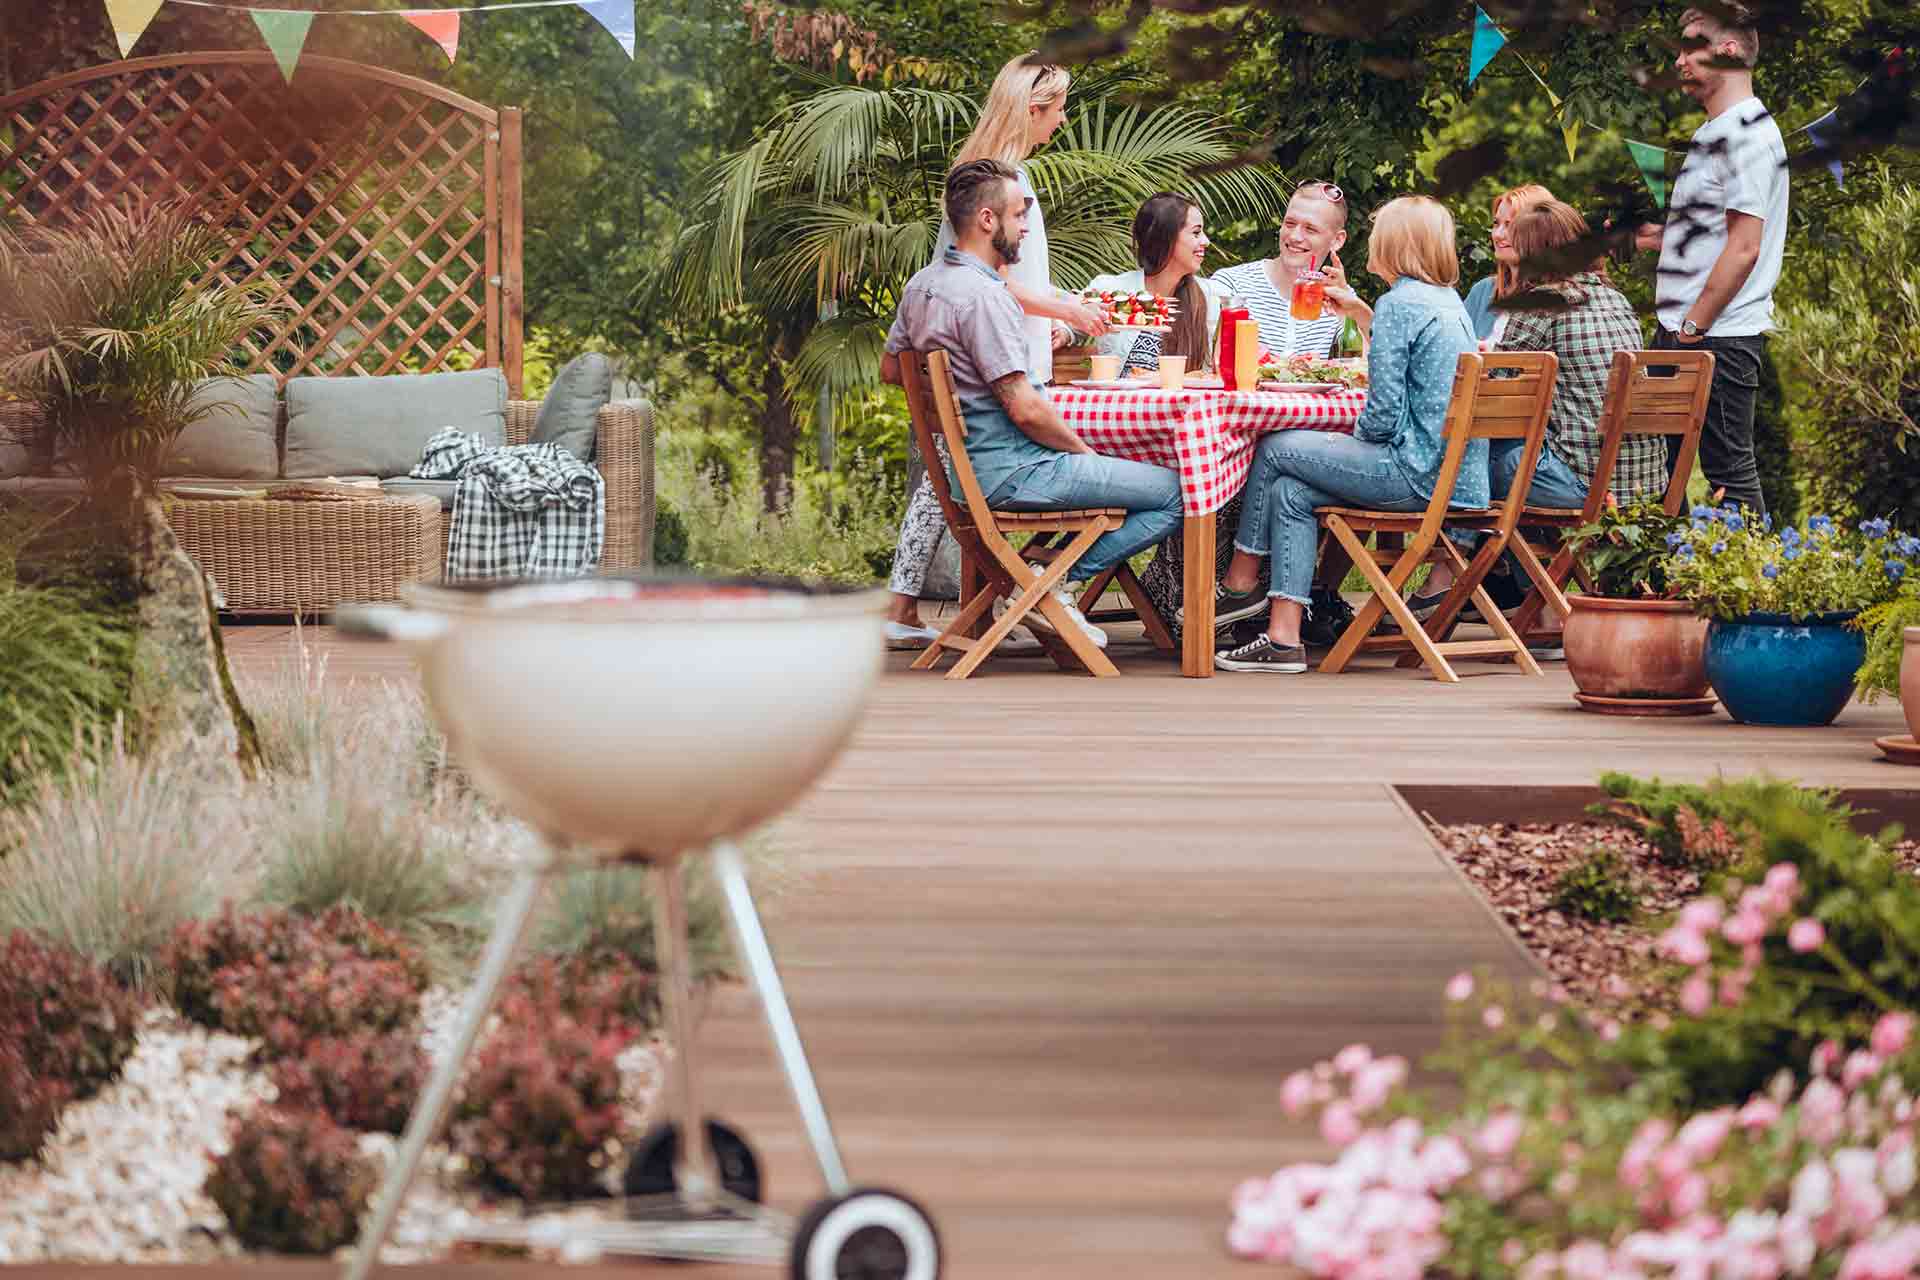 Hosting The Perfect Garden Party: 5 Top Preparation Tips